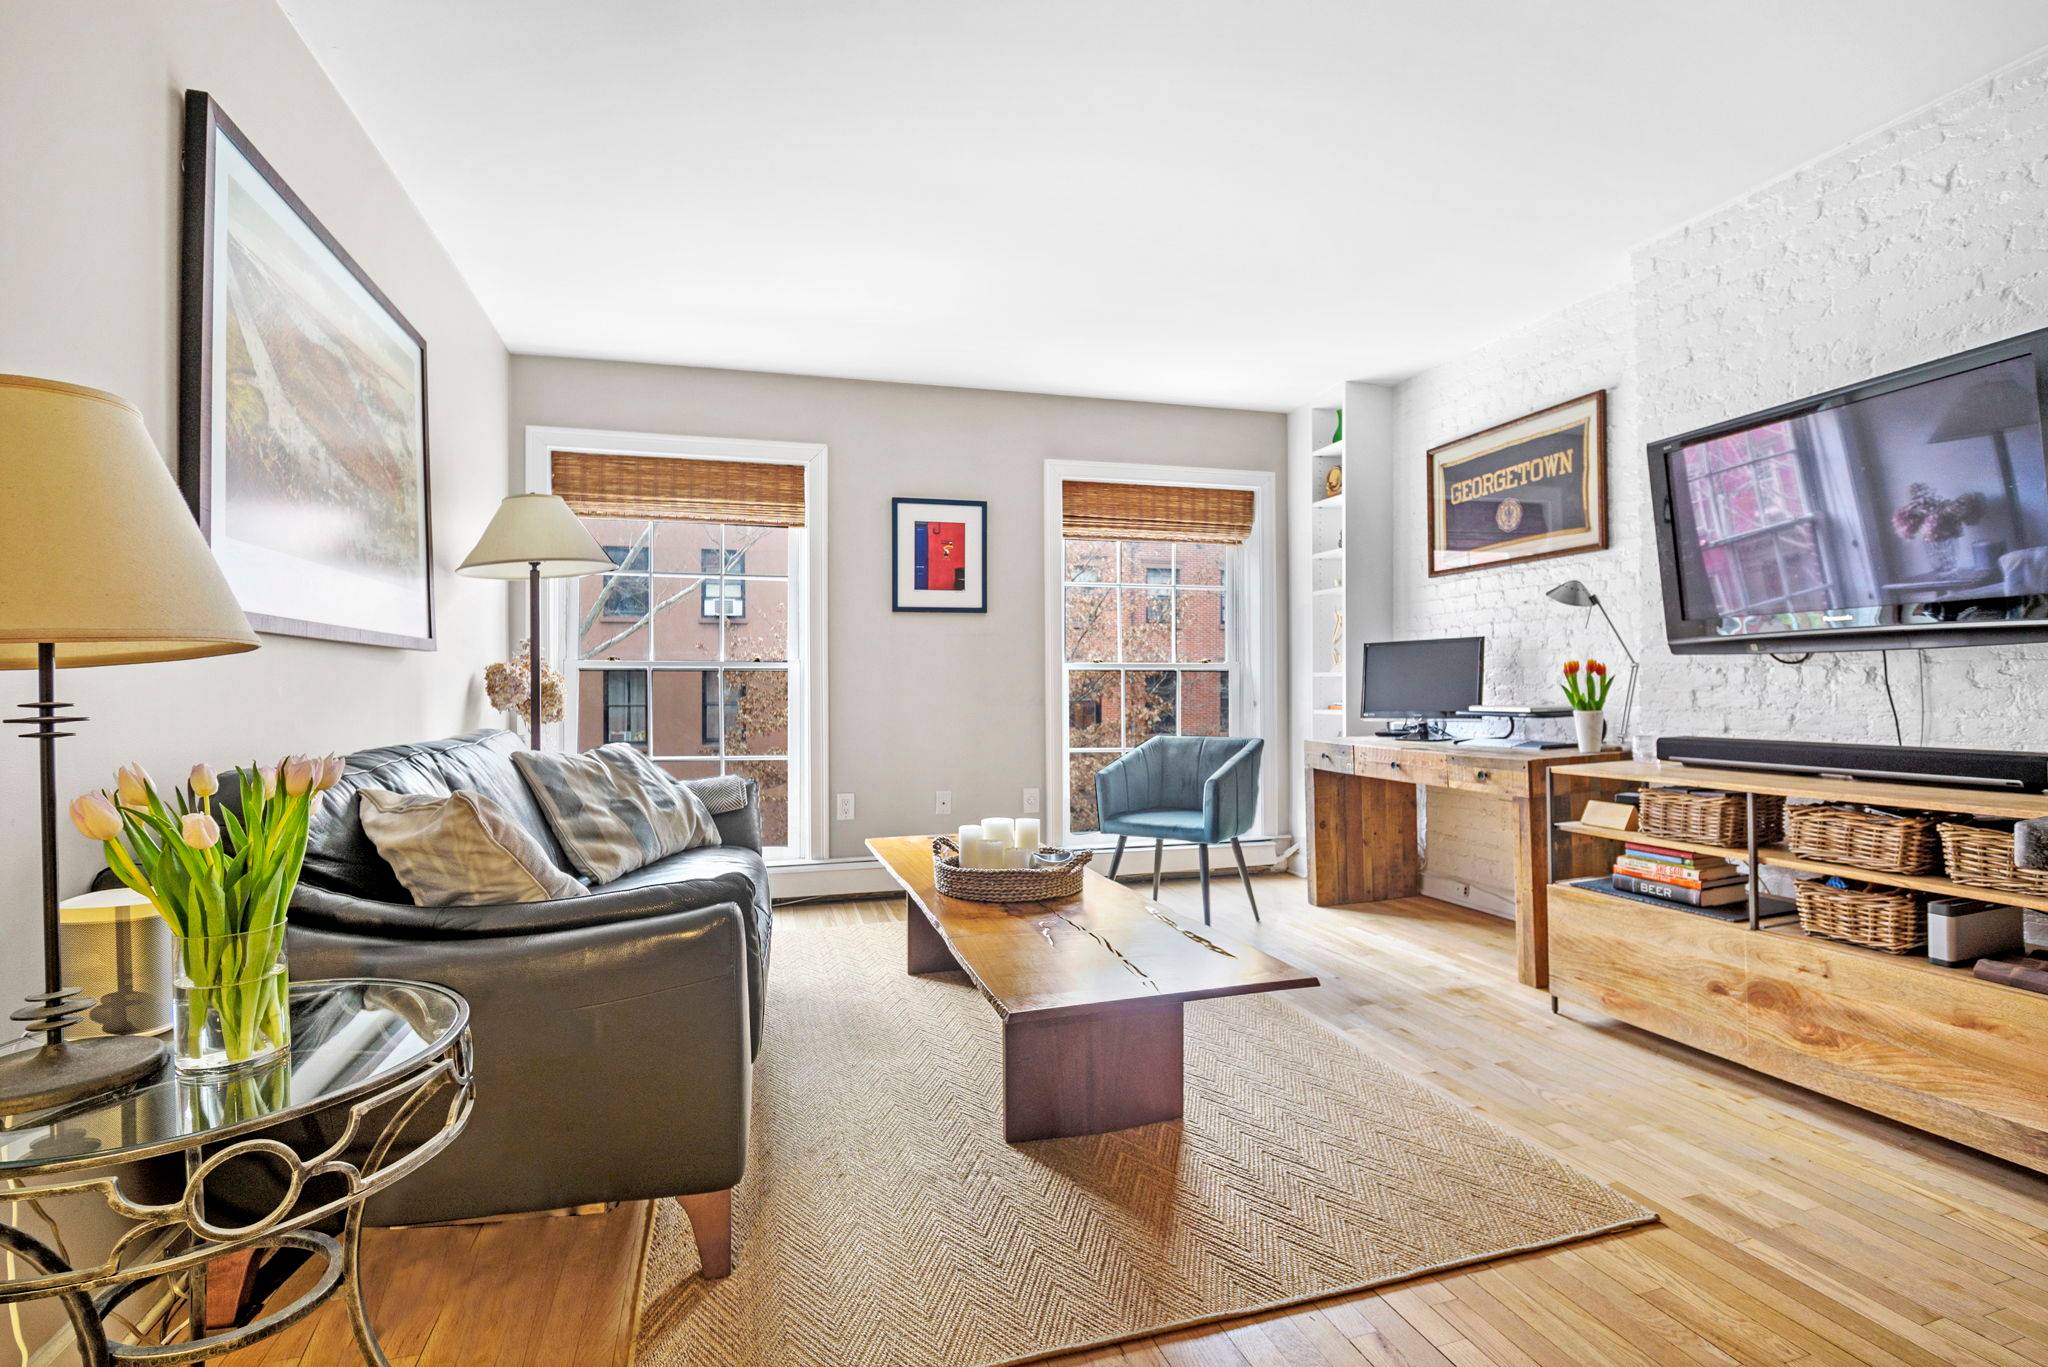 A Brooklyn Heights Classic Serenely situated on a stunning block in a 19th century townhouse in the heart of Brooklyn Heights is this lovely, bright, renovated one bedroom apartment with ...